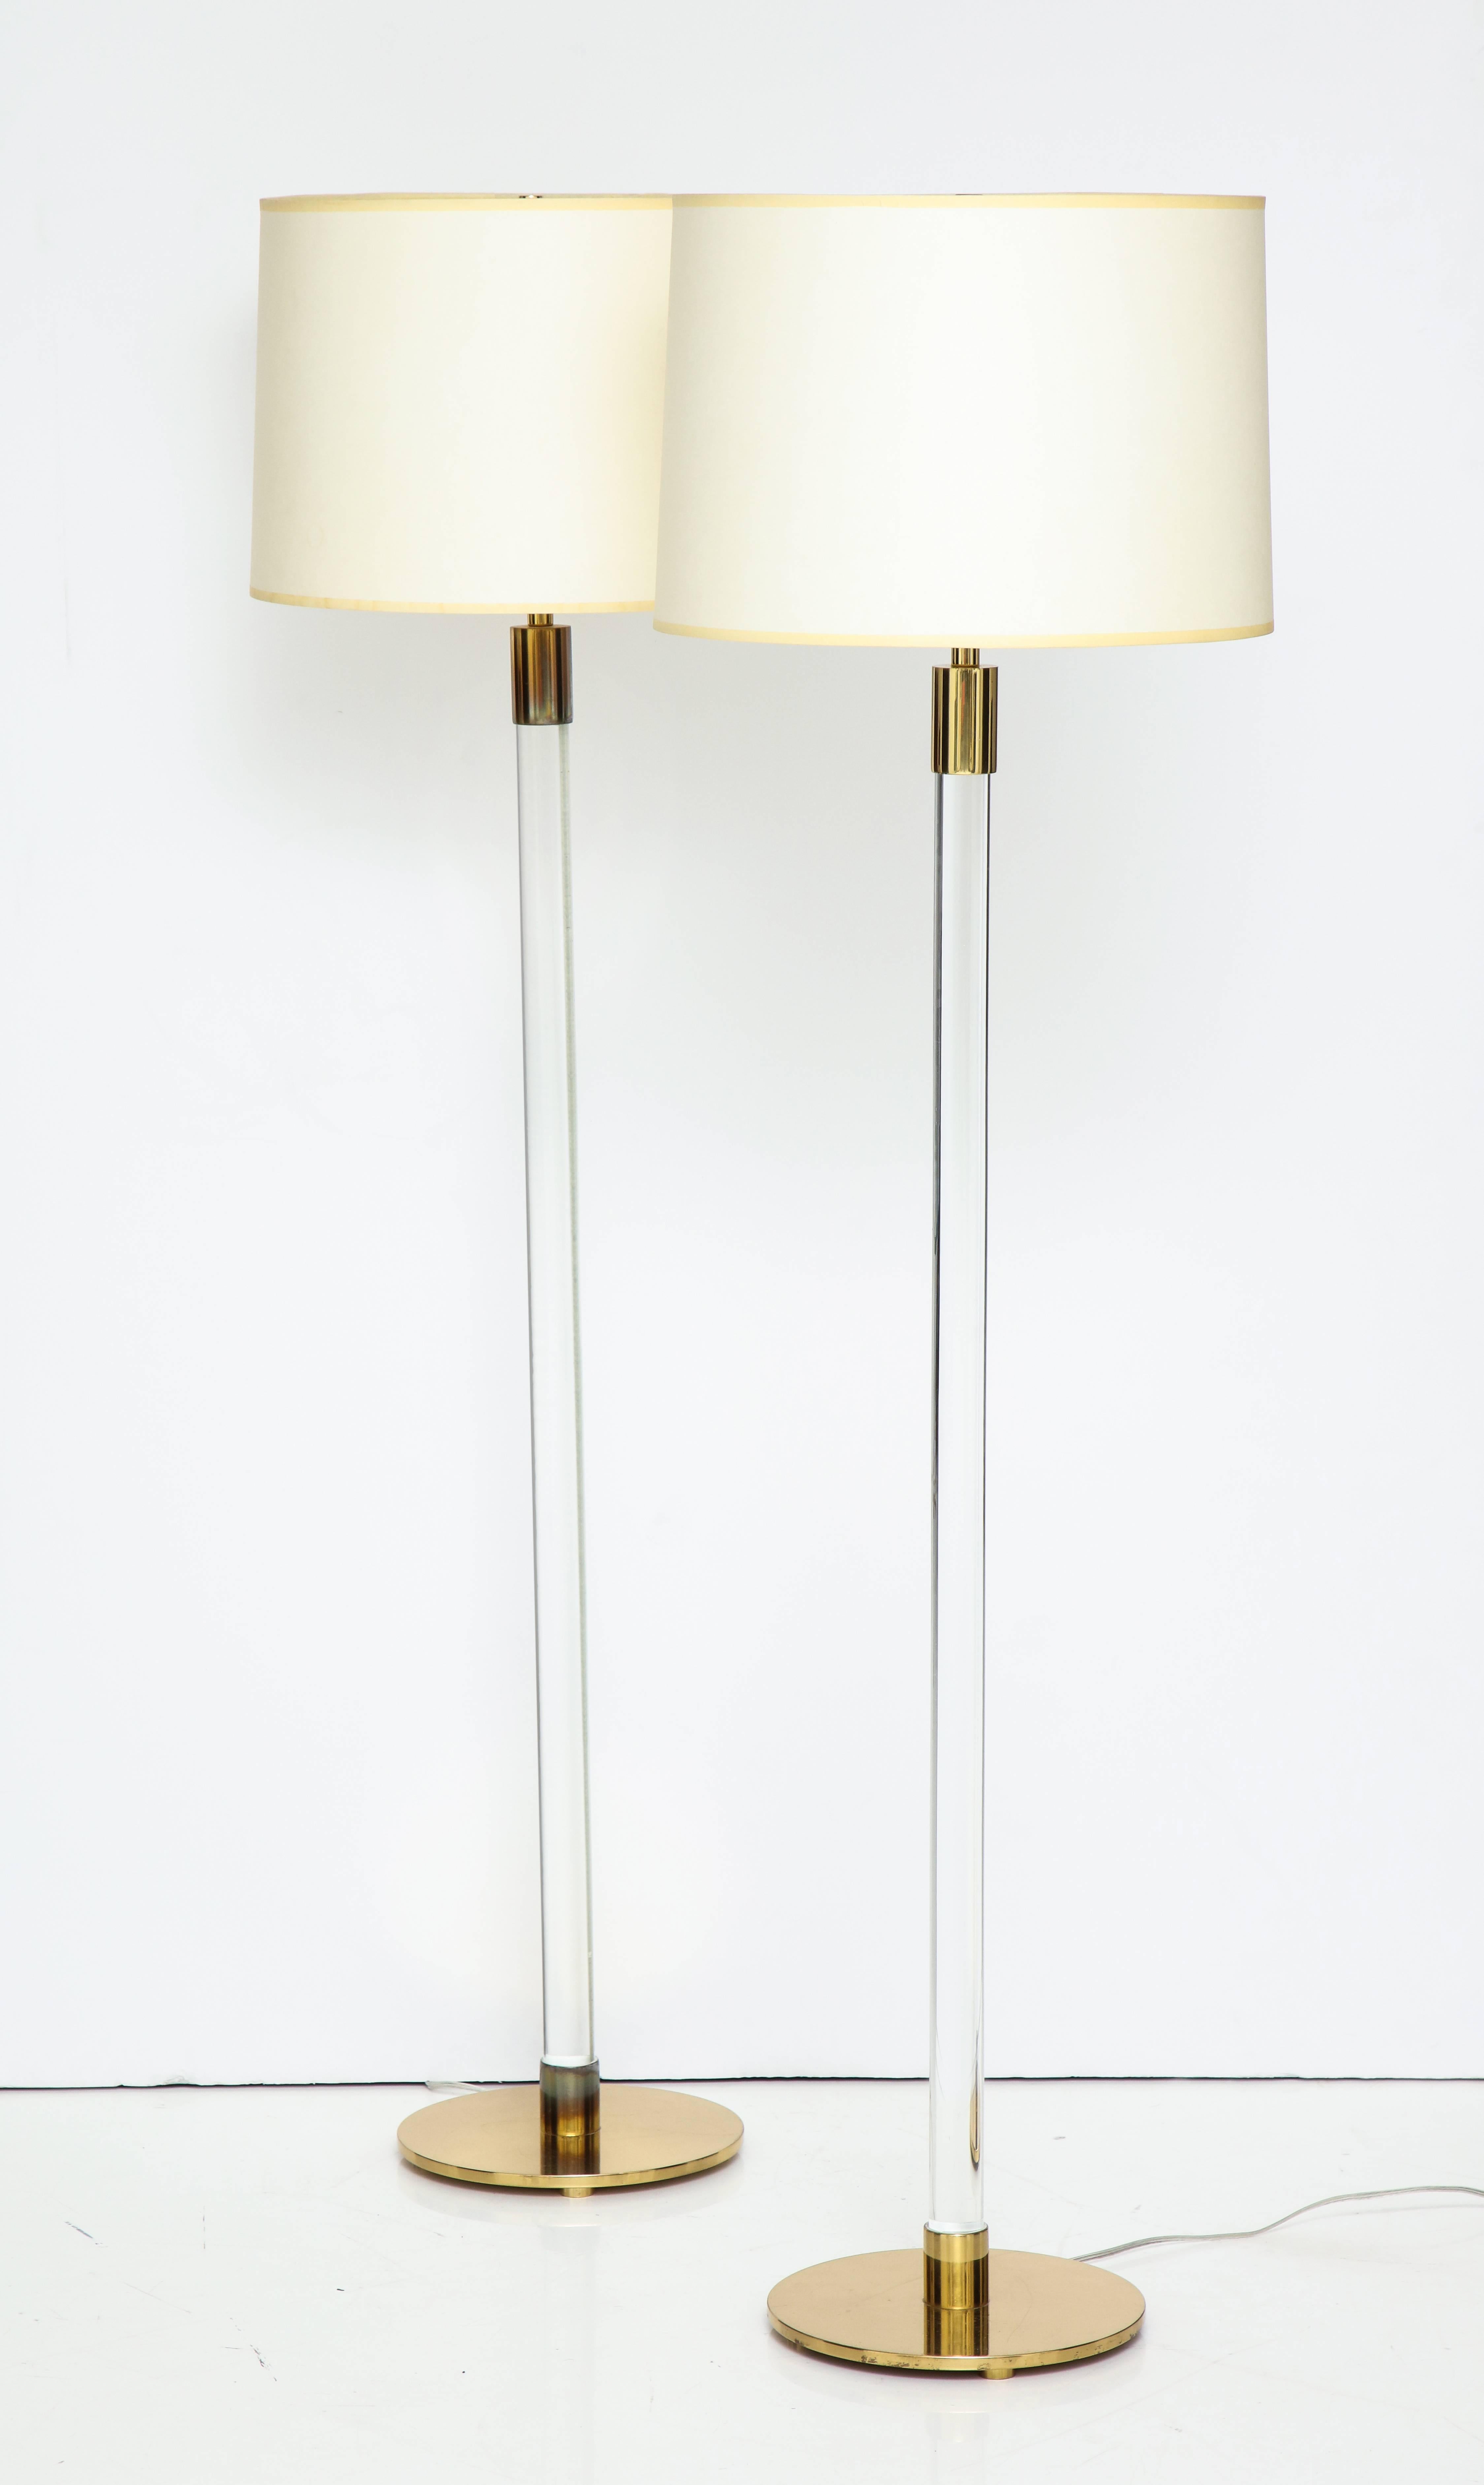 Pair of brass and glass floor lamps with the less common round disc base. Made by Hansen, circa 1970s. The cord runs in a channel up the back of the glass columns, and is invisible from most angles. With recent shades. Both with Hansen marks